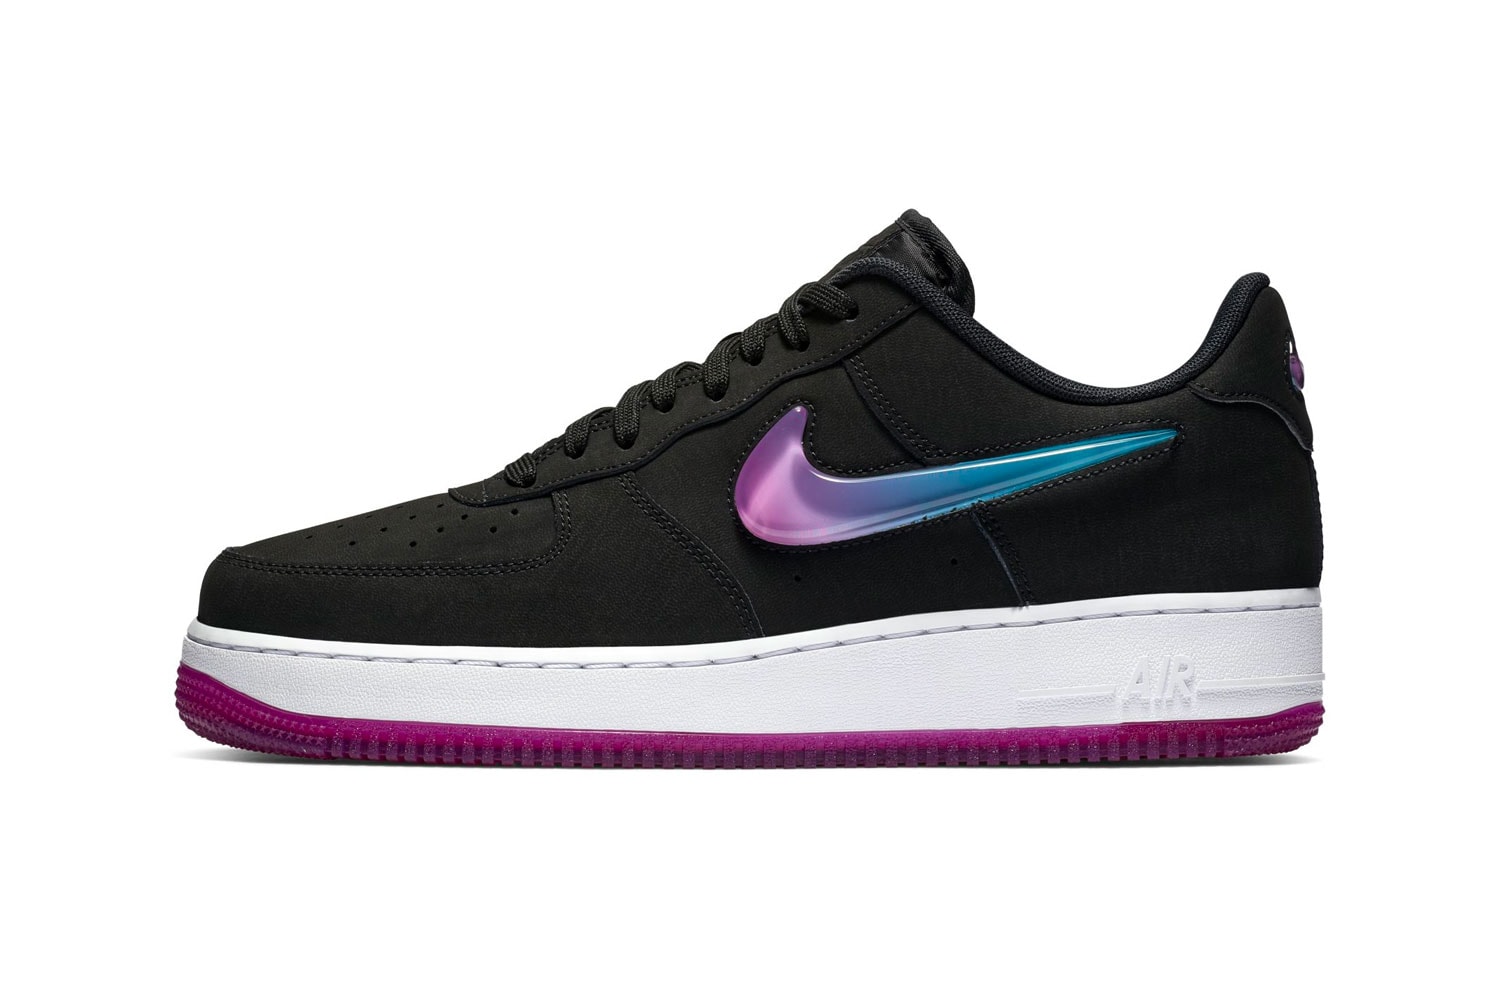 Nike Air Force 1 '07 Premium "Active Fuchsia" Oversized Jewel Swoosh gradient black pink blue colorway sneaker release date info price stockist Color: Black/Active Fuchsia-Blue Lagoon-White Style Code: AT4143 001